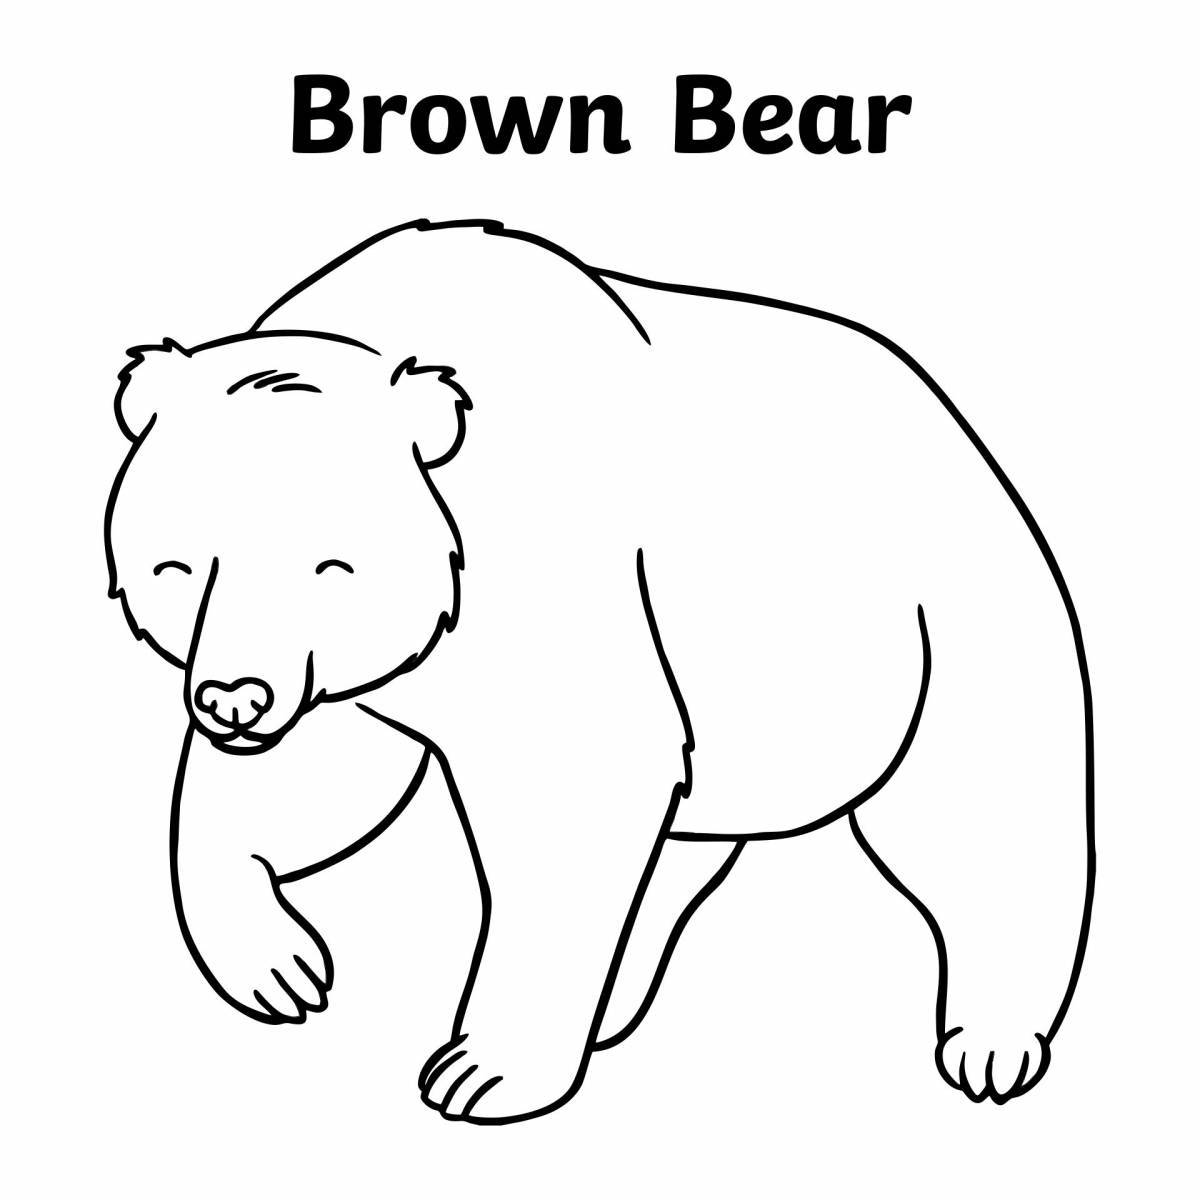 Majestic brown bear coloring page